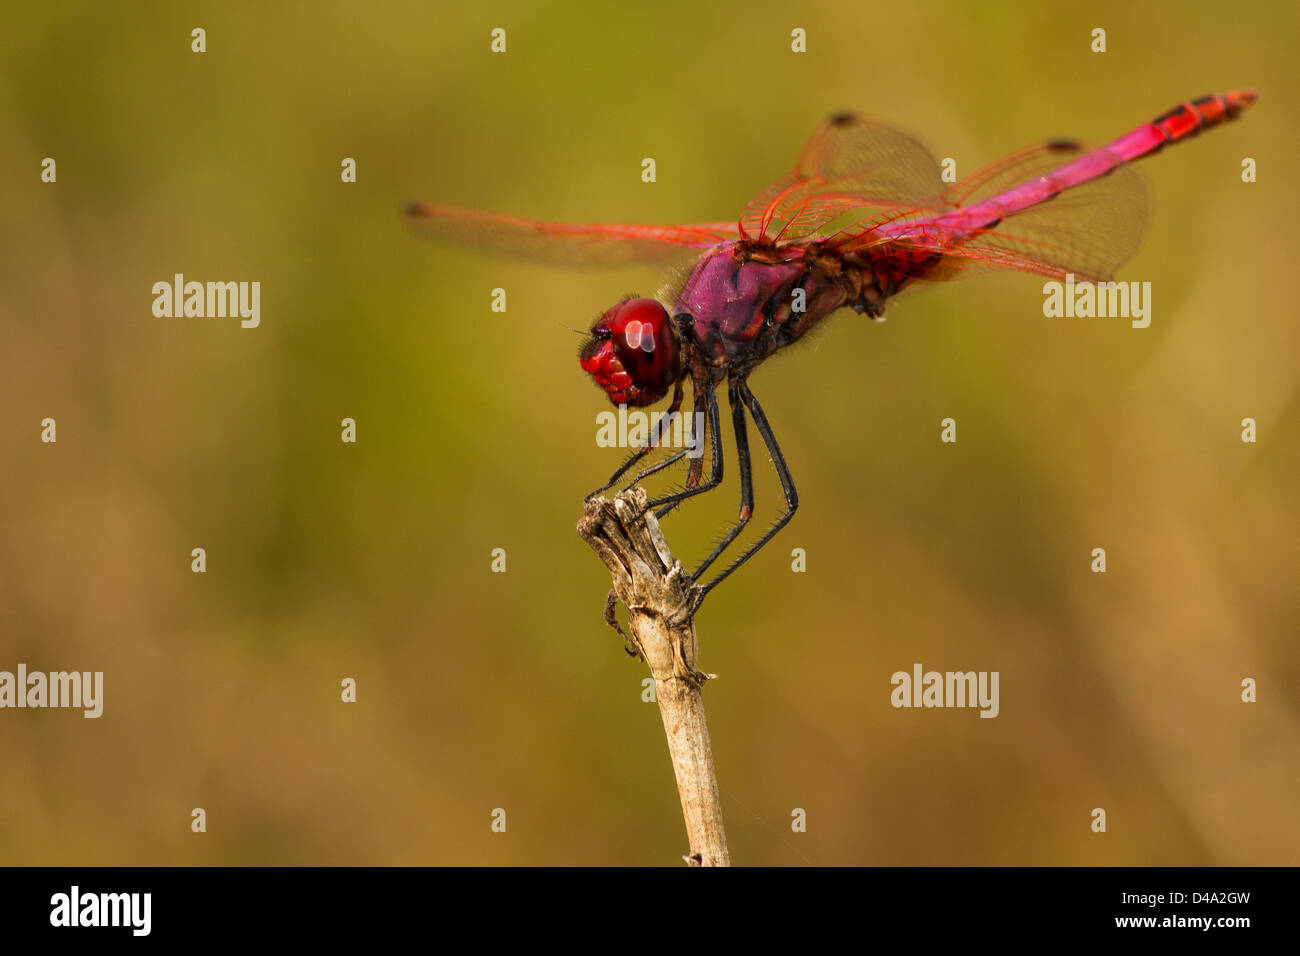 Violet Dropwing Dragonfly on a perch with green background Stock Photo